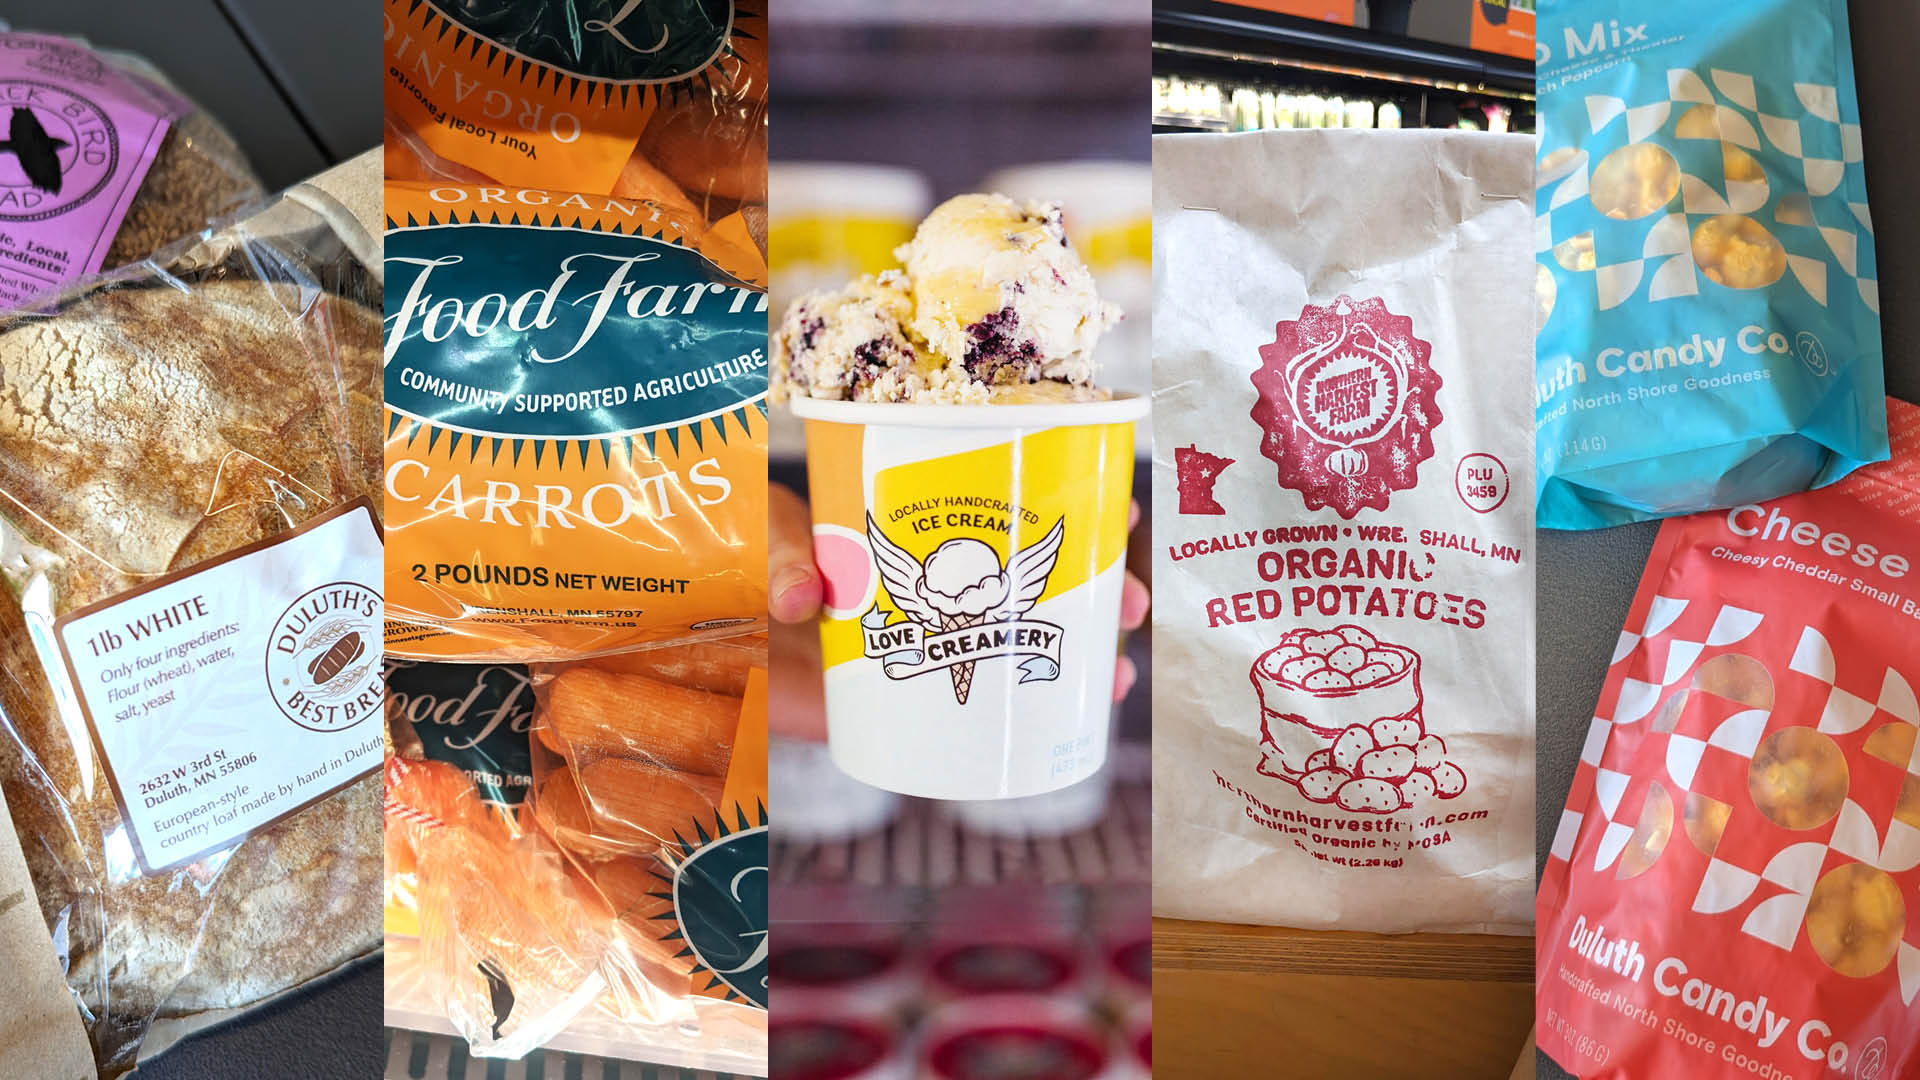 A collage of various food items, including bread, a bag of carrots, a cup of ice cream, a bag of potatoes, and a bag of cheese candy corn. Each item is packaged in branded packaging and displayed in its respective setting, such as a grocery store or an ice cream shop.